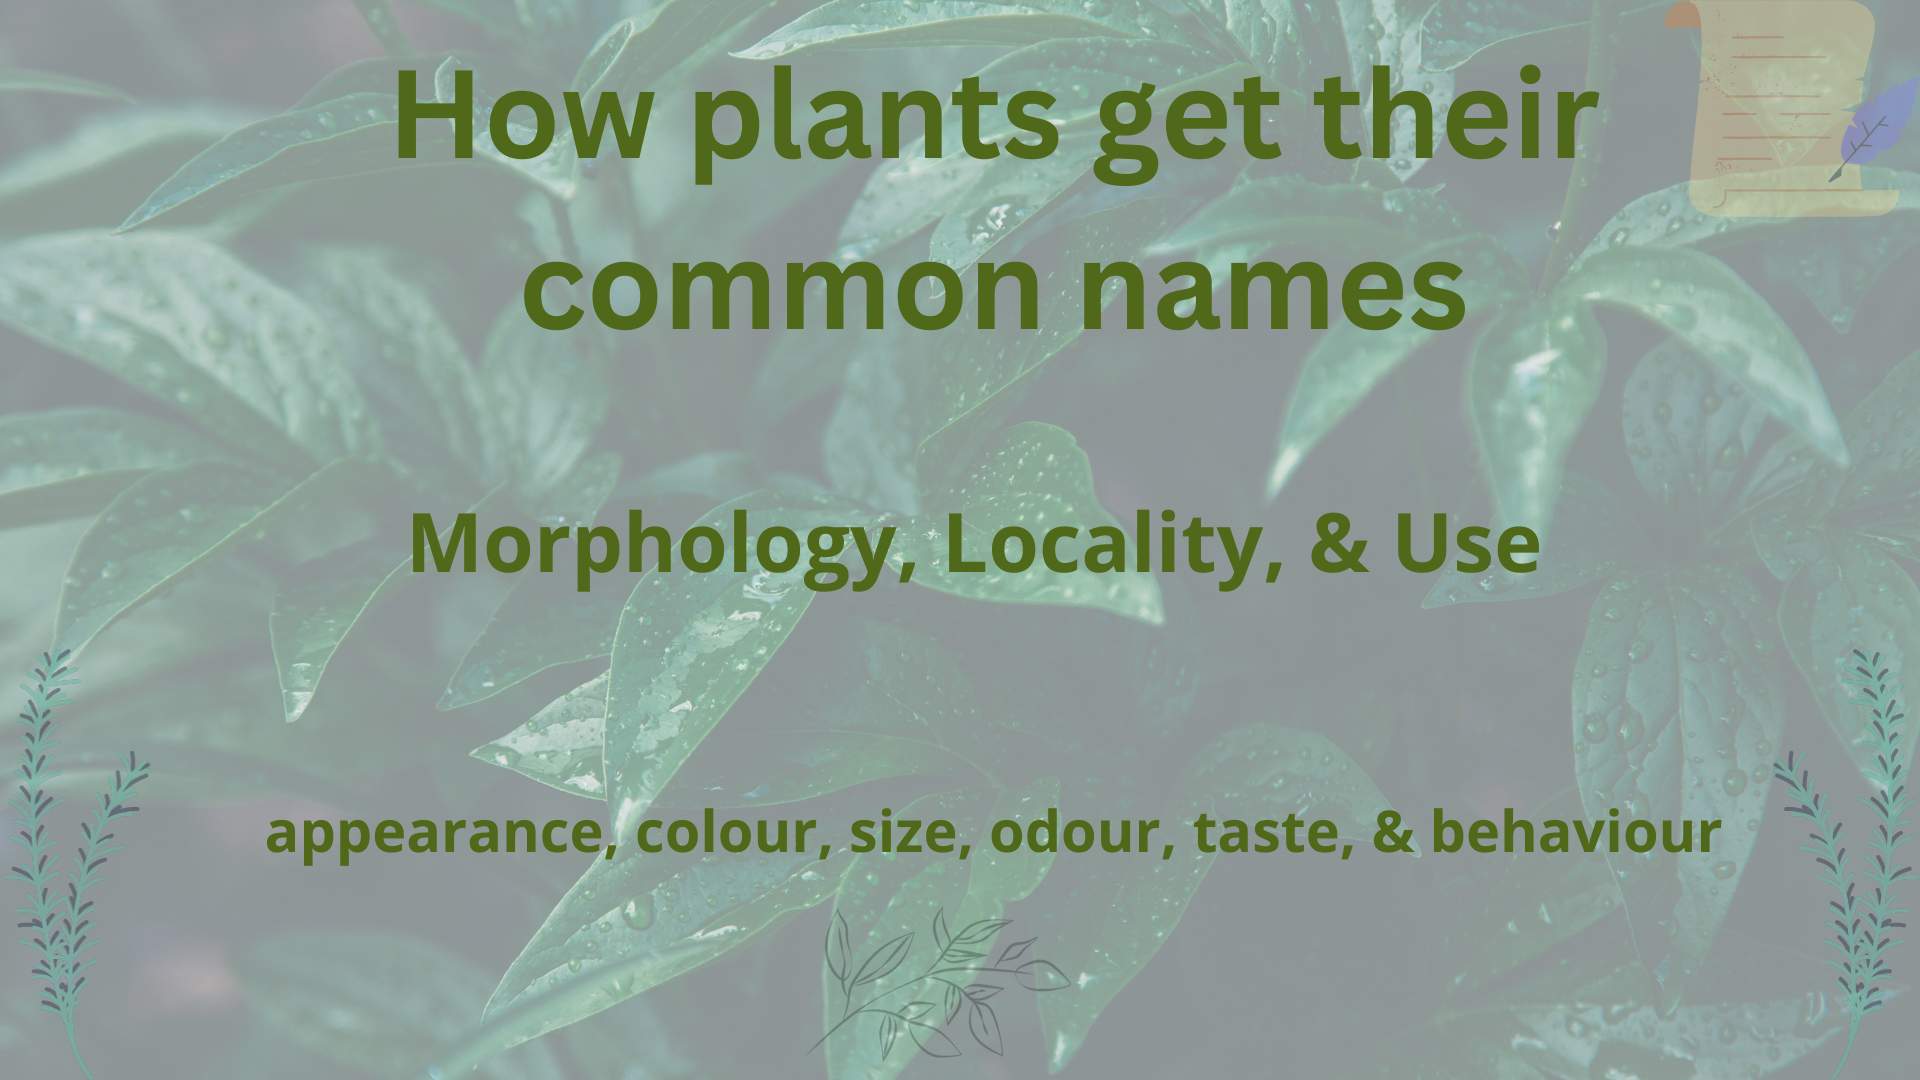 How plants get their common names